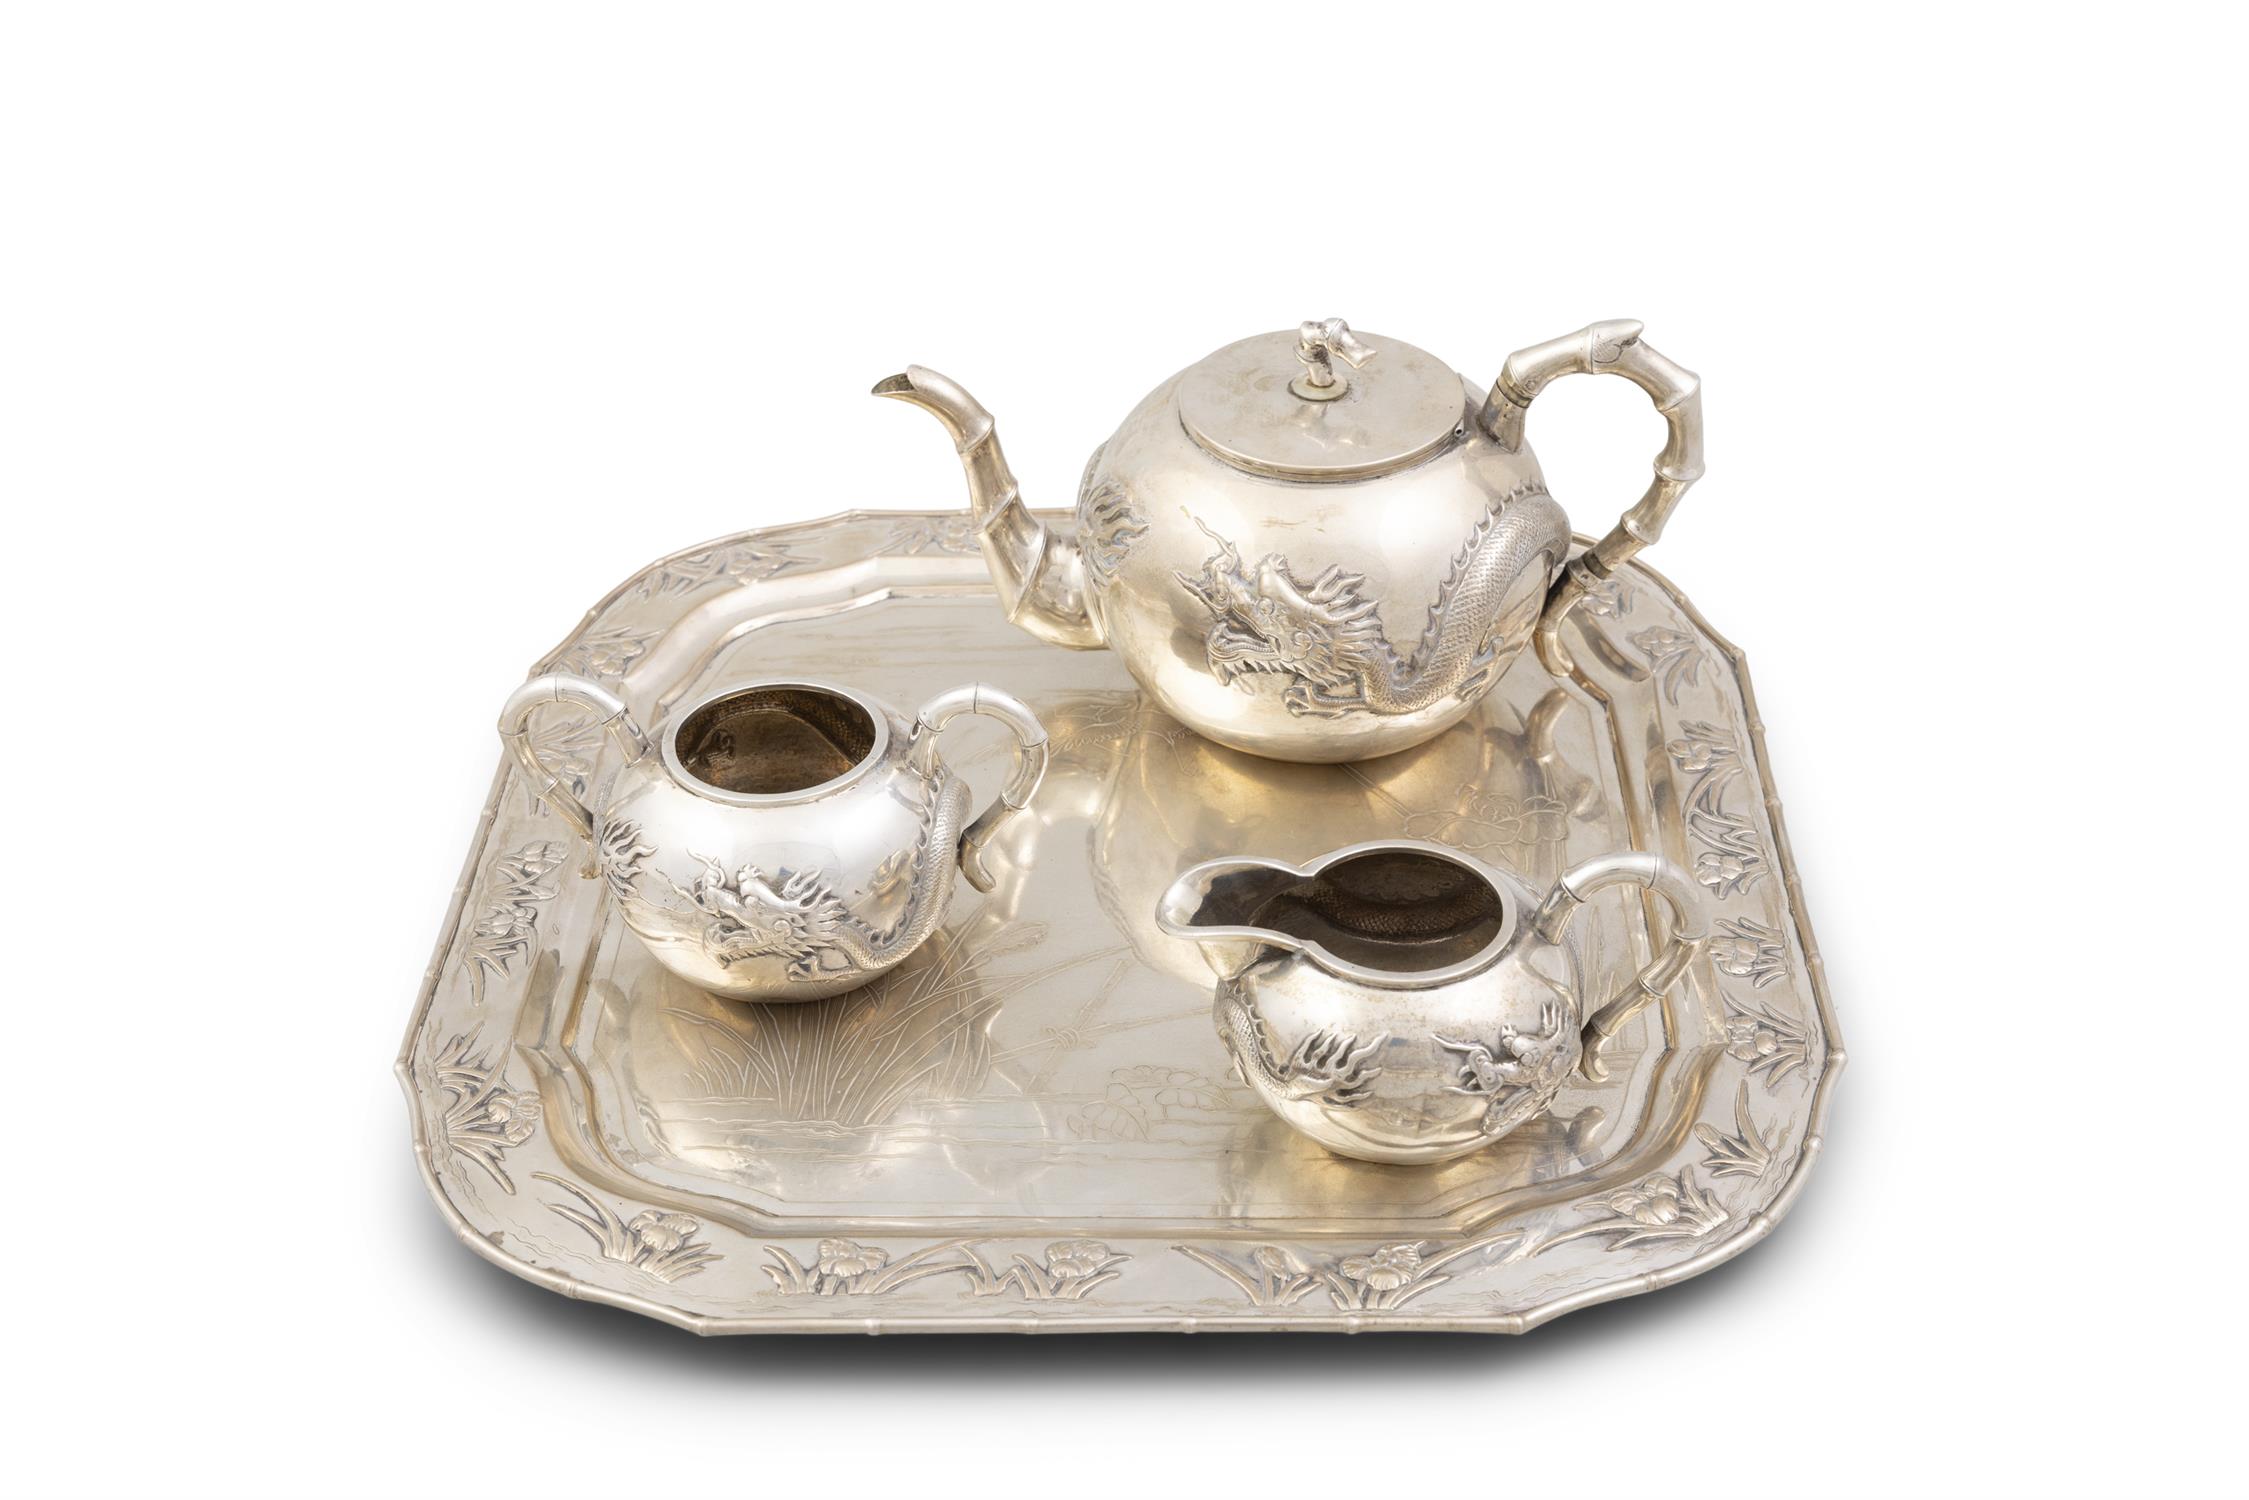 A CHINESE EXPORT 'DRAGON' TEA SET, EARLY 20TH CENTURY comprising a tea pot, sugar bowl and - Image 2 of 6